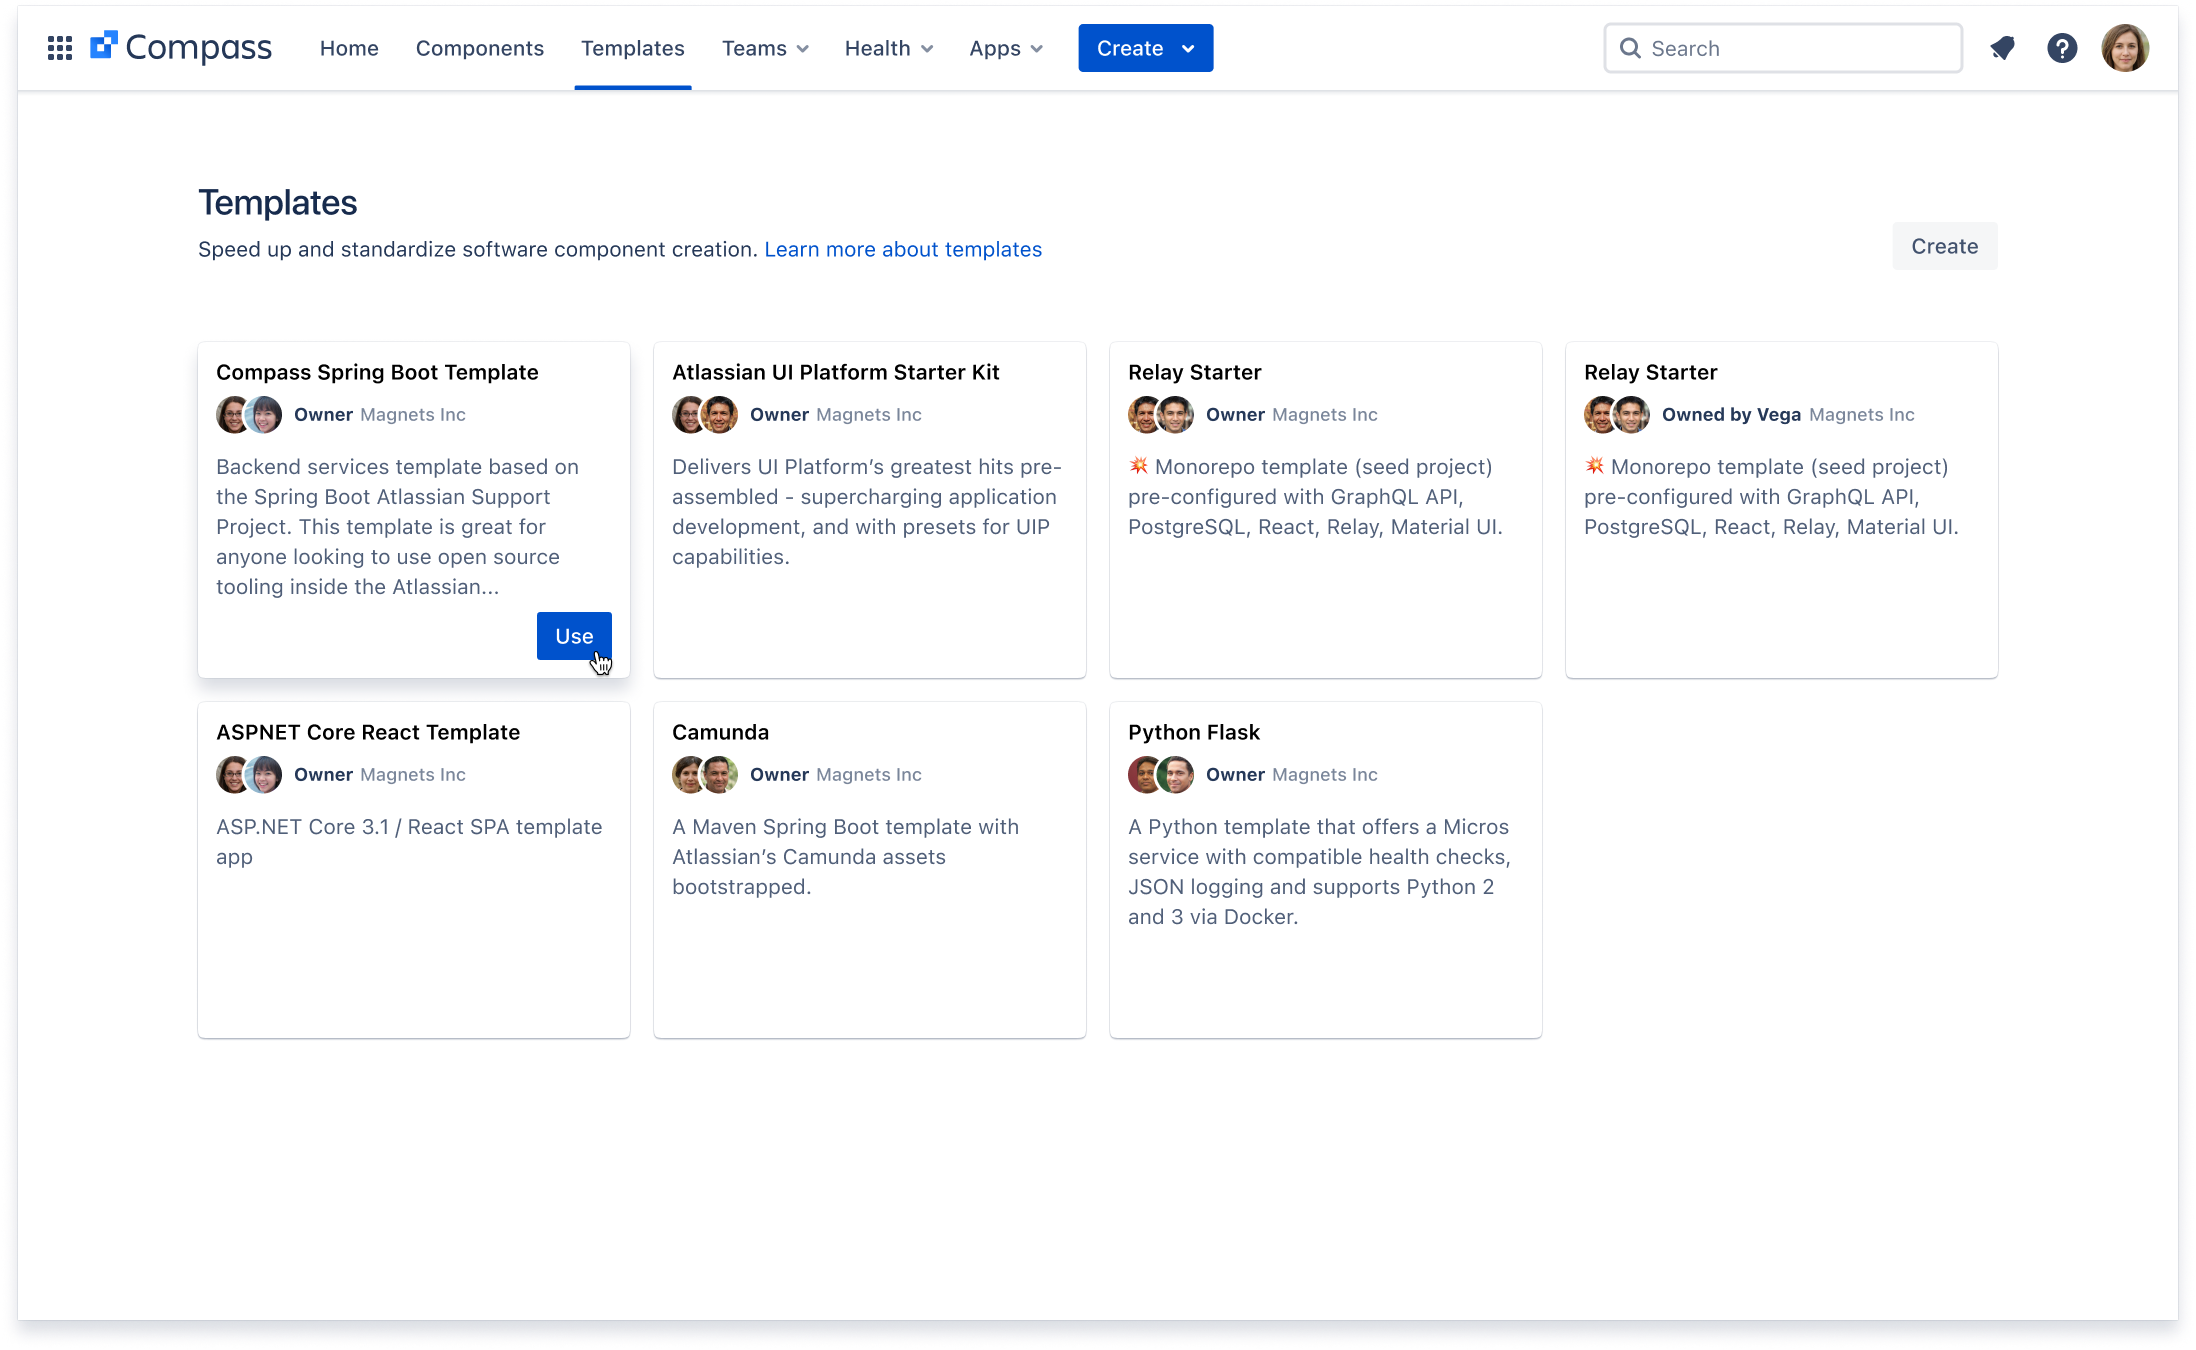 The Compass Templates page, showing templates created by a software team